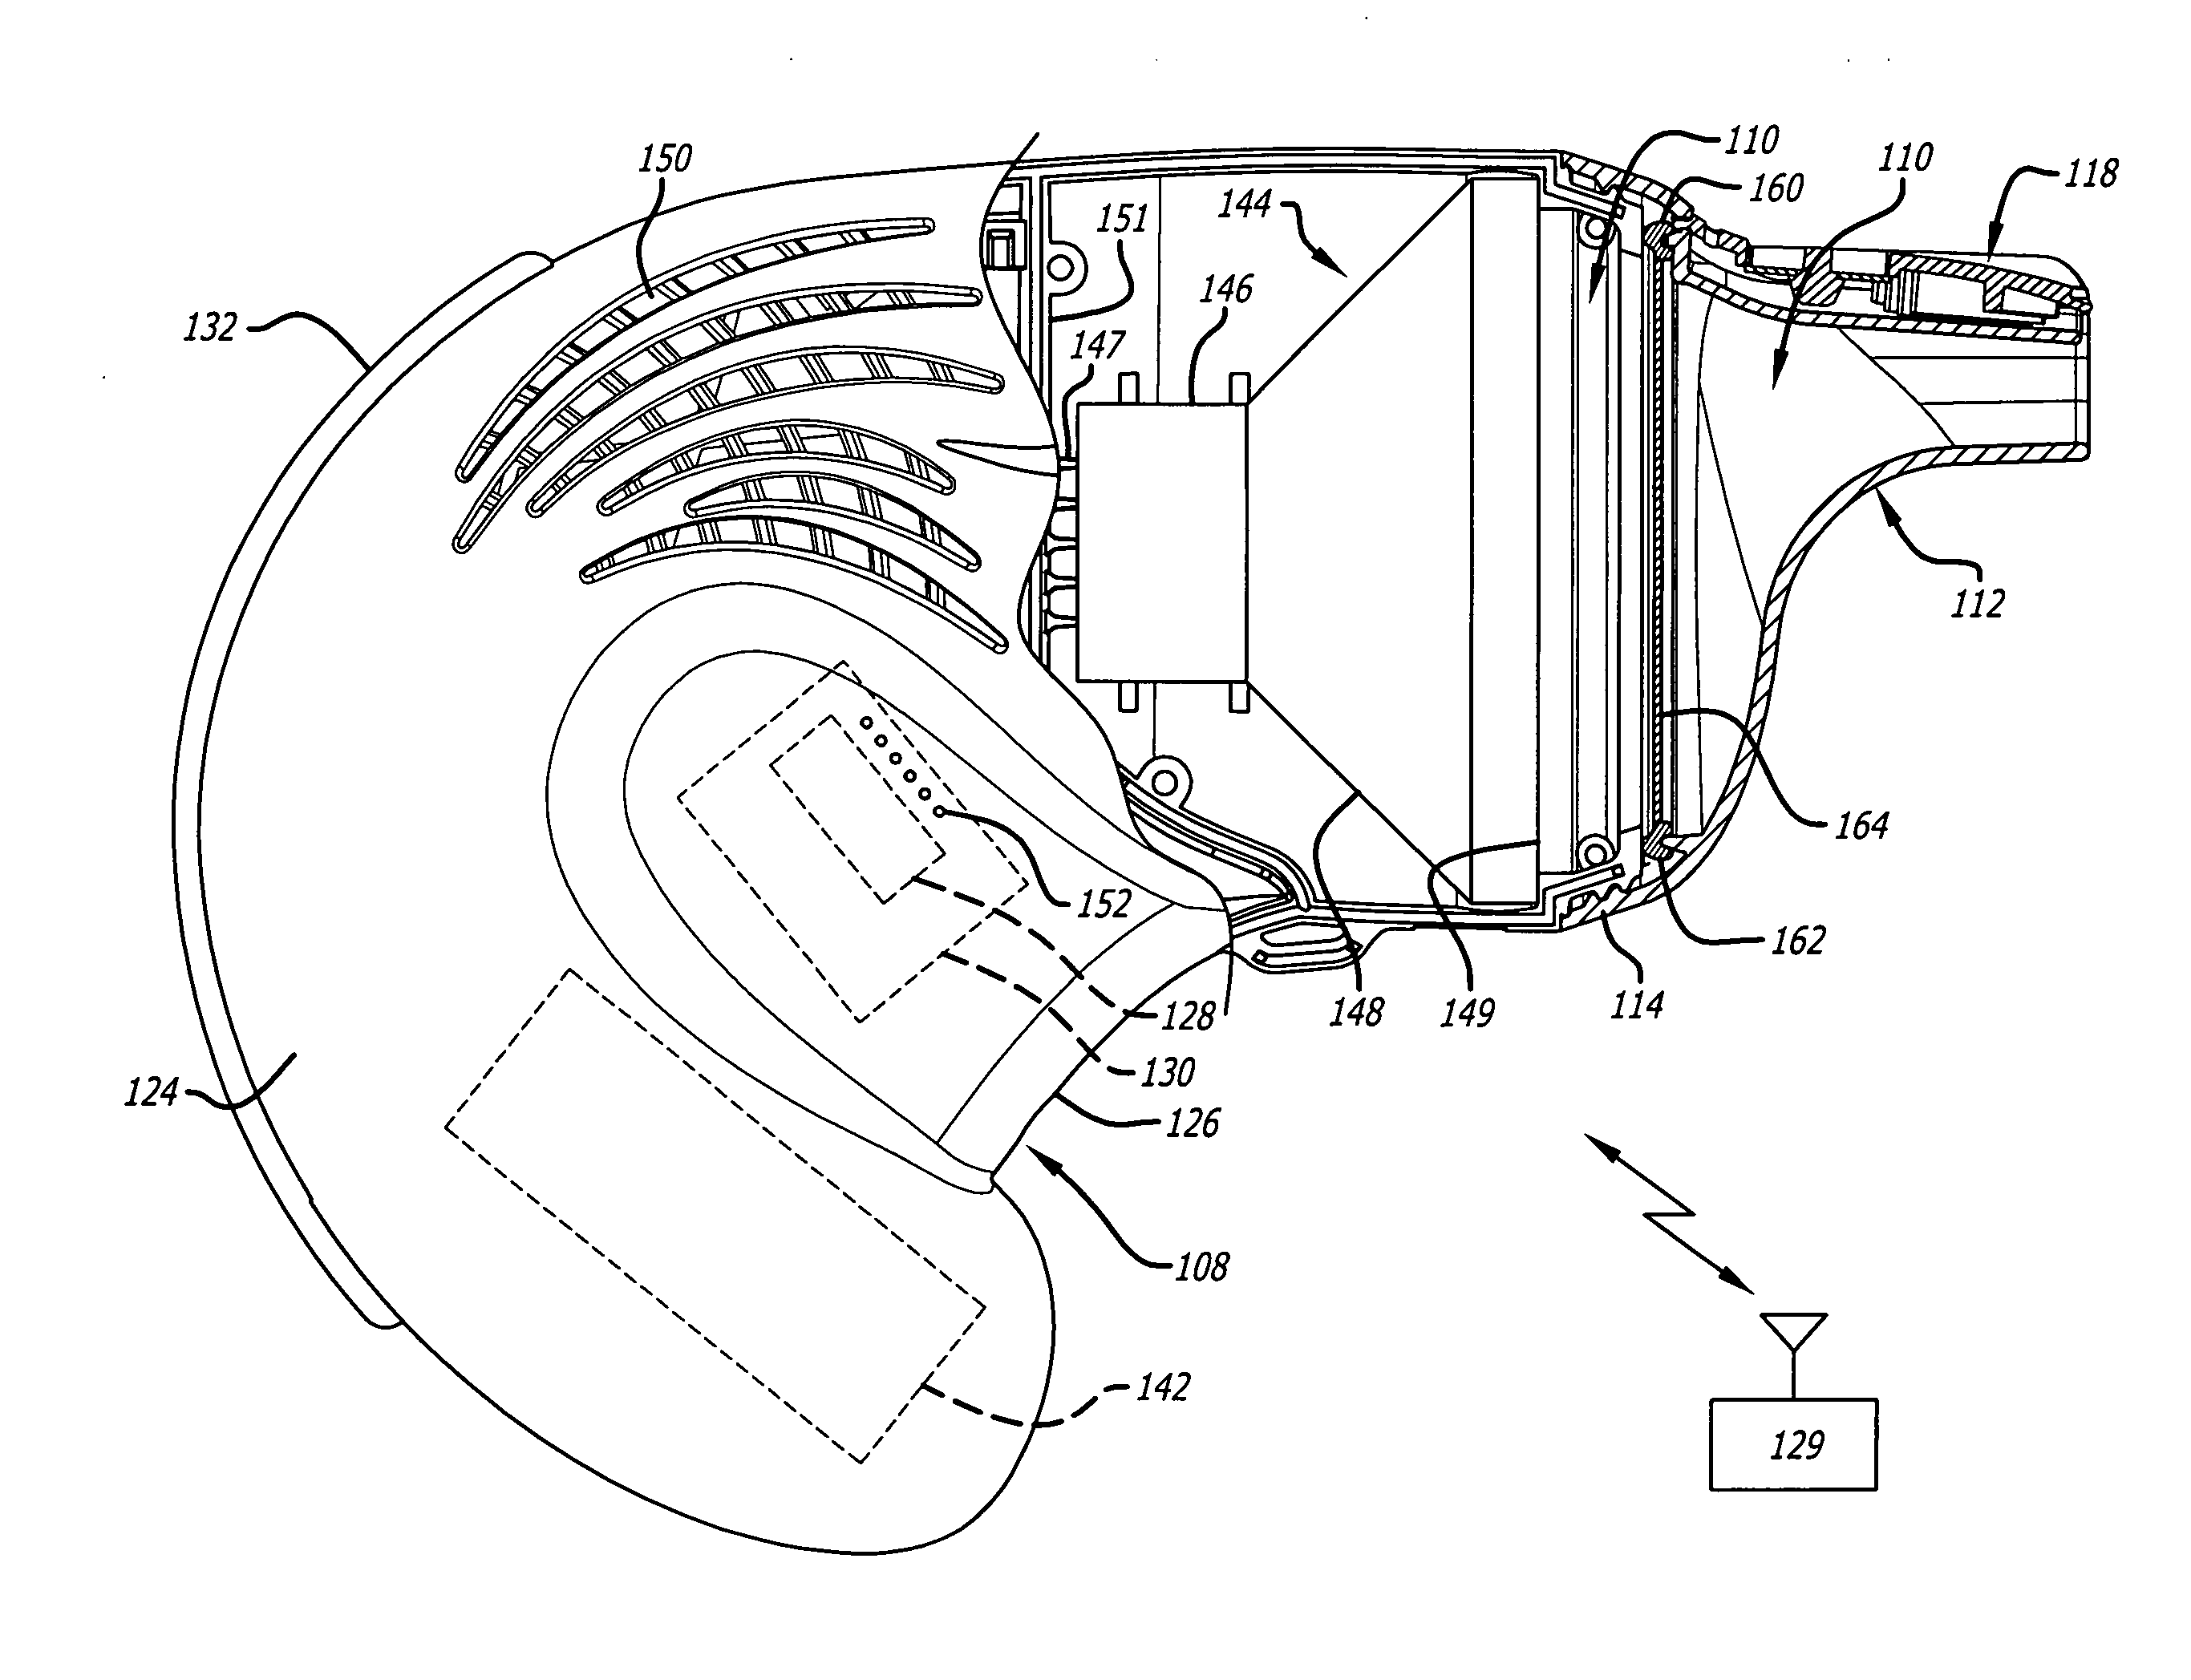 Acoustic respiratory therapy apparatus